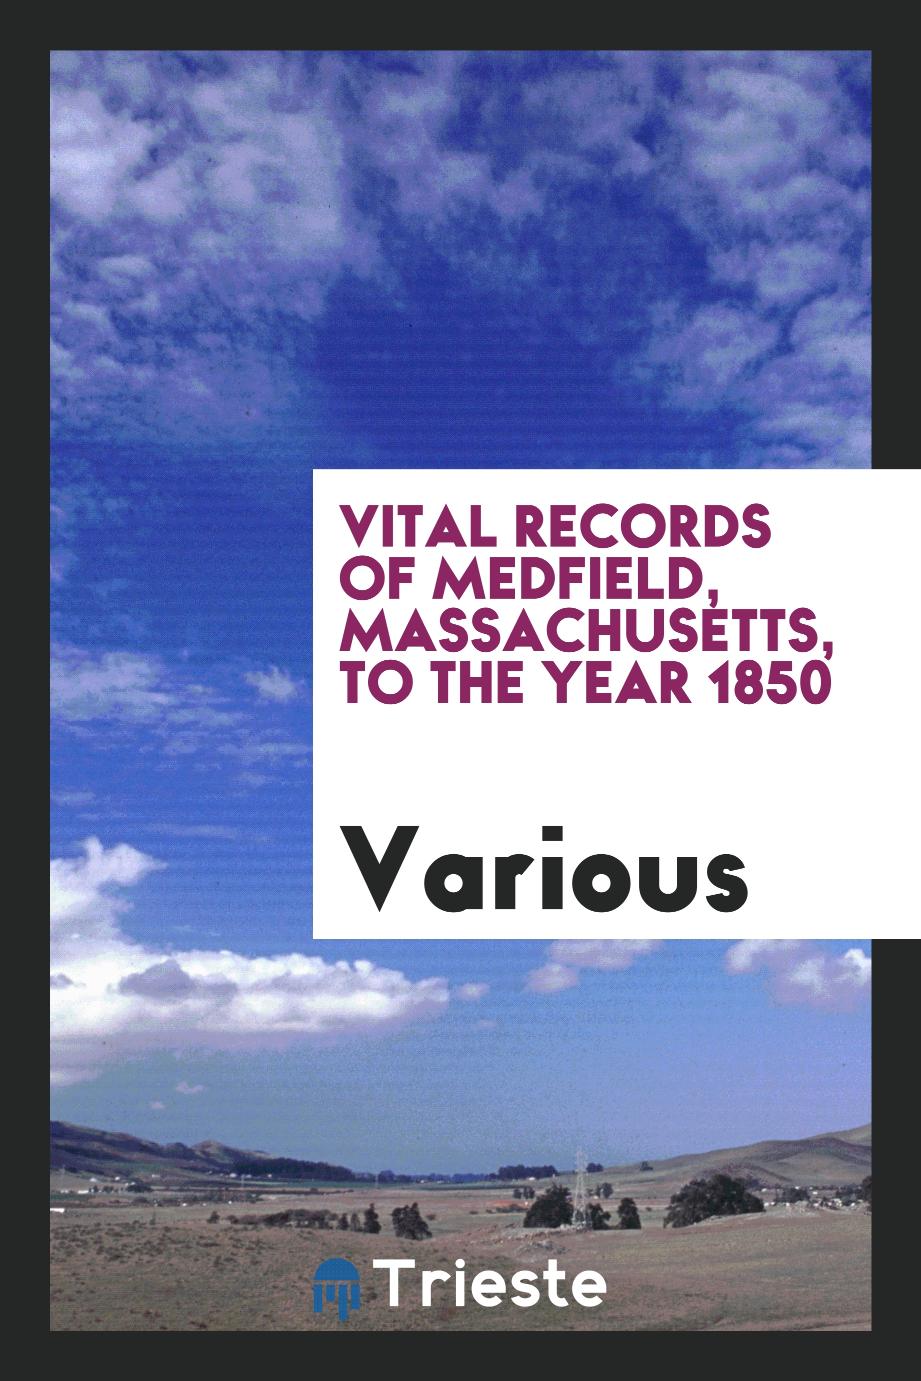 Vital records of Medfield, Massachusetts, to the year 1850